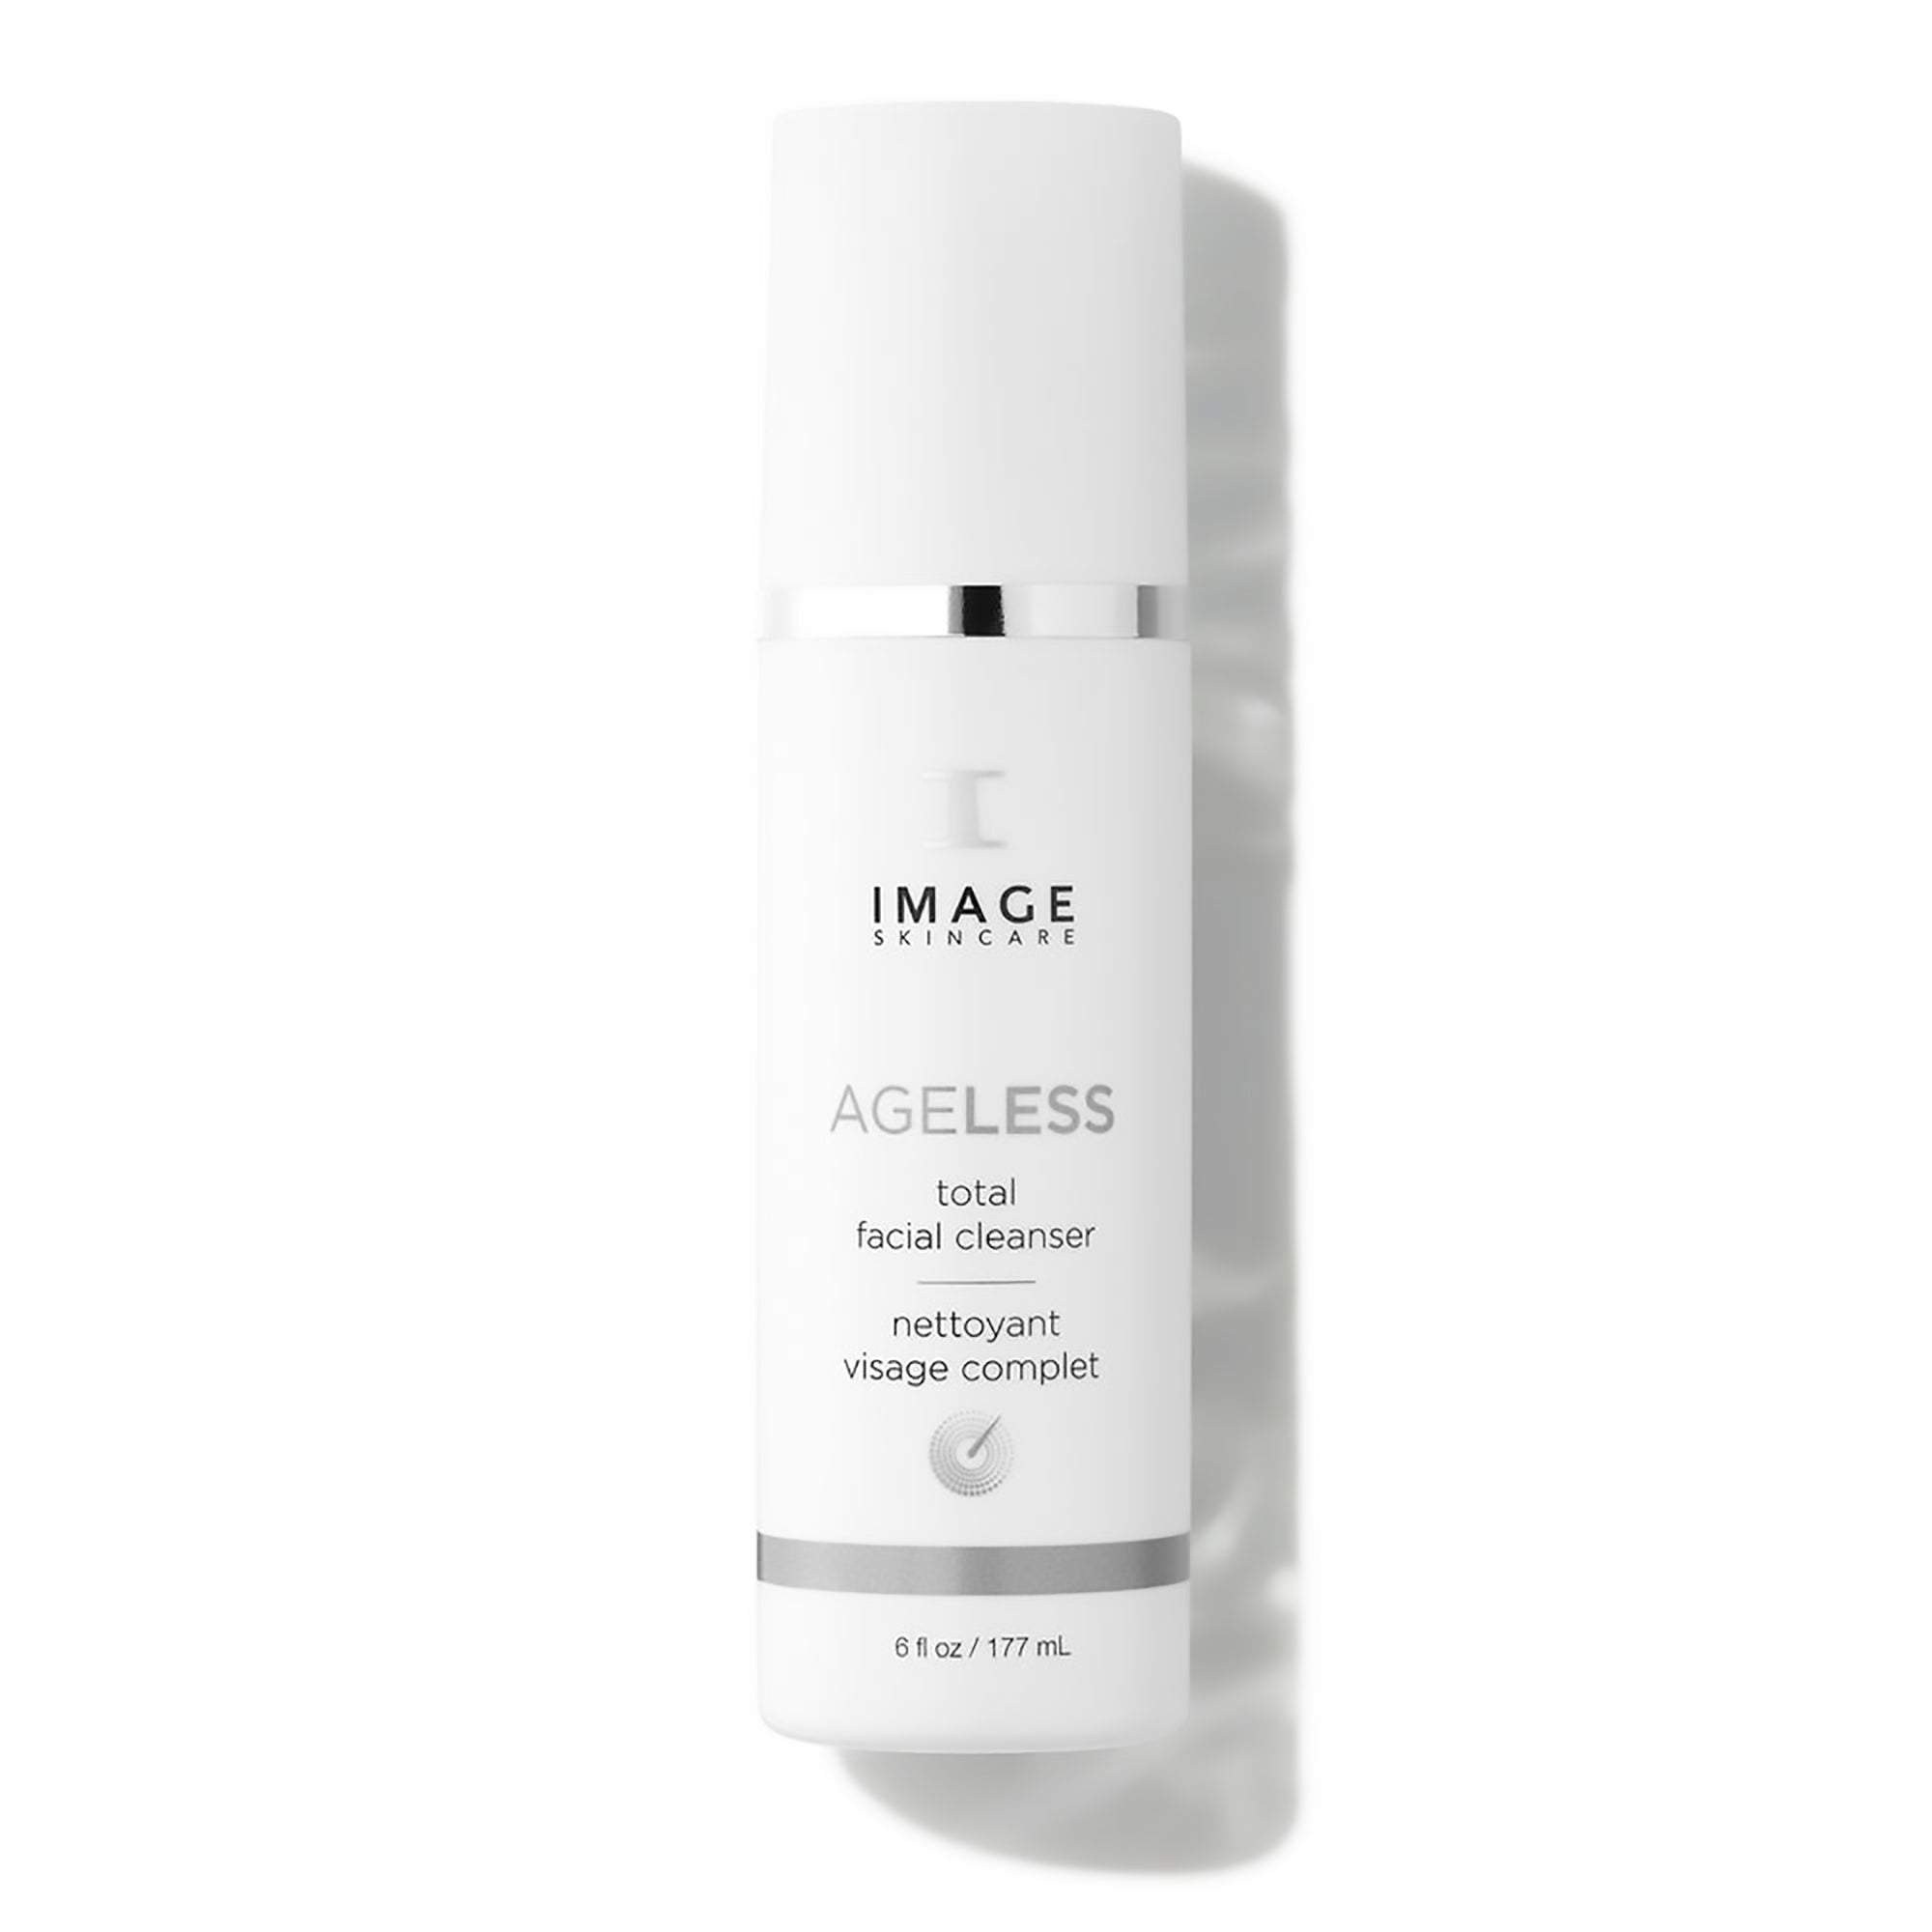 Image Skincare Ageless Total Facial Cleanser / 6OZ